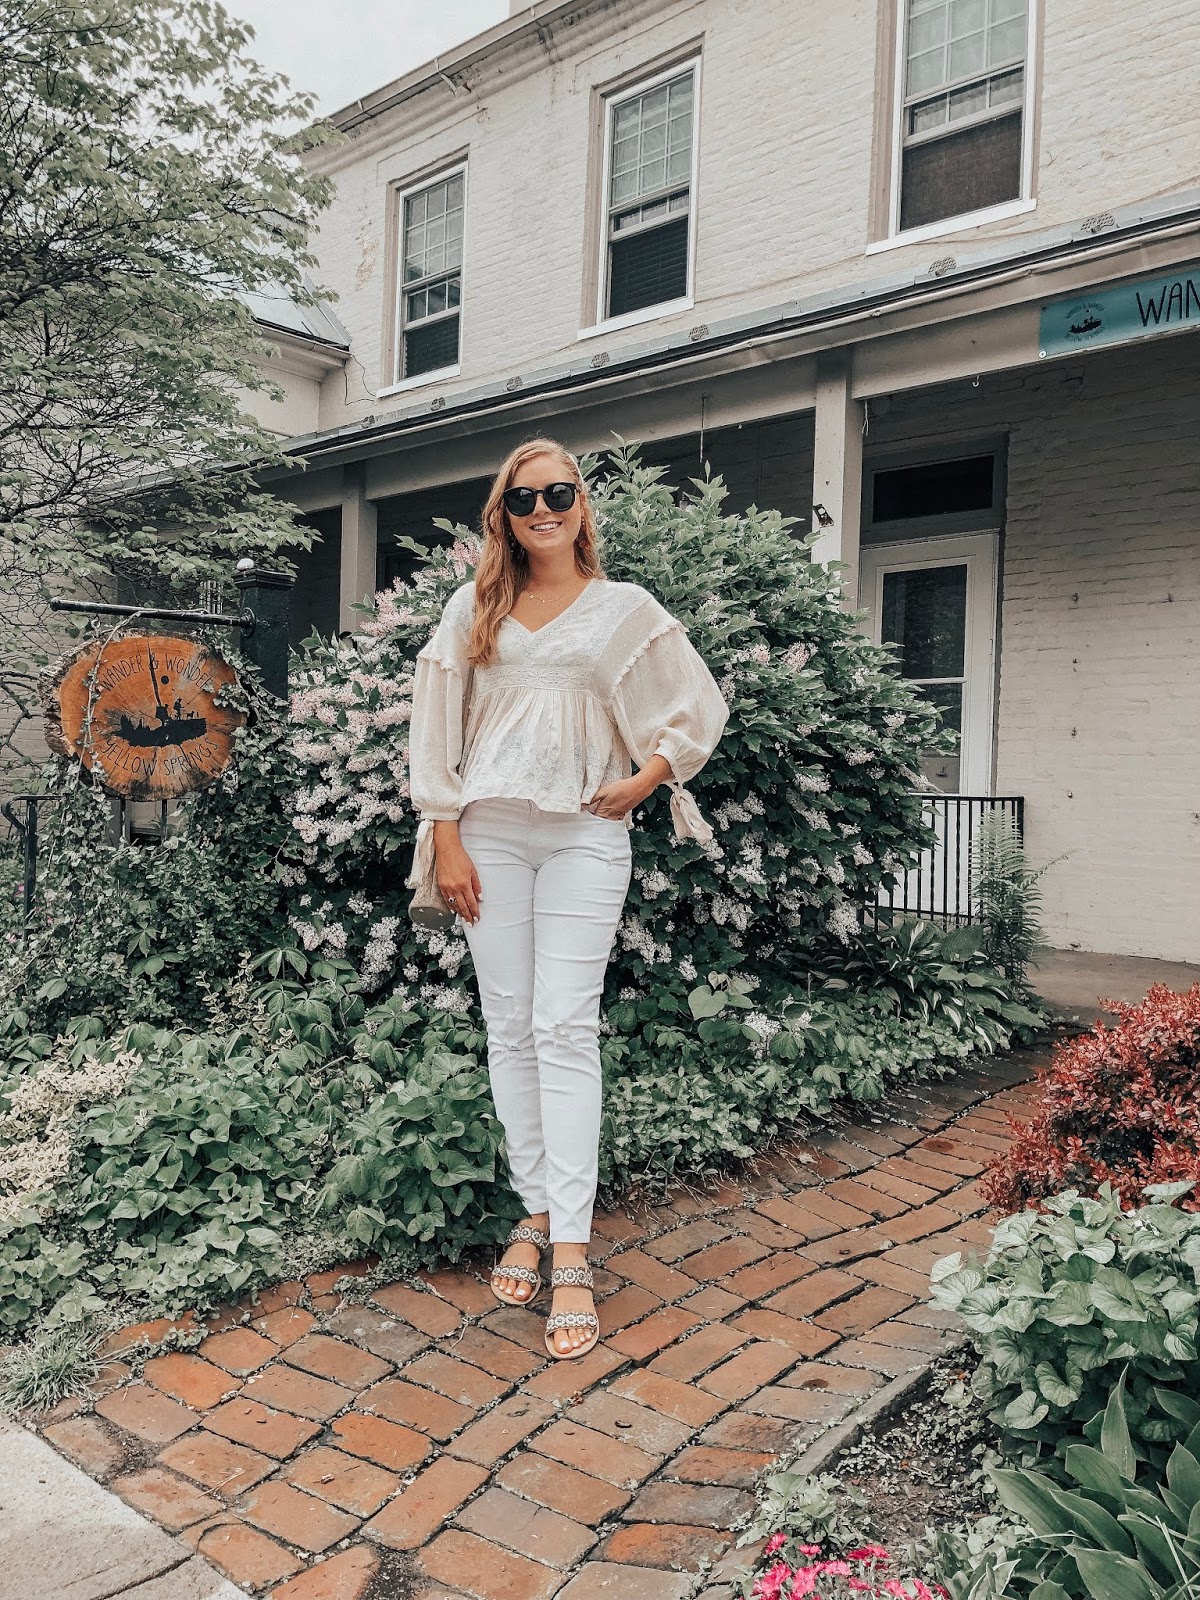 affordable by amanda is a tampa blogger sharing her favorite white denim jeans on a budget